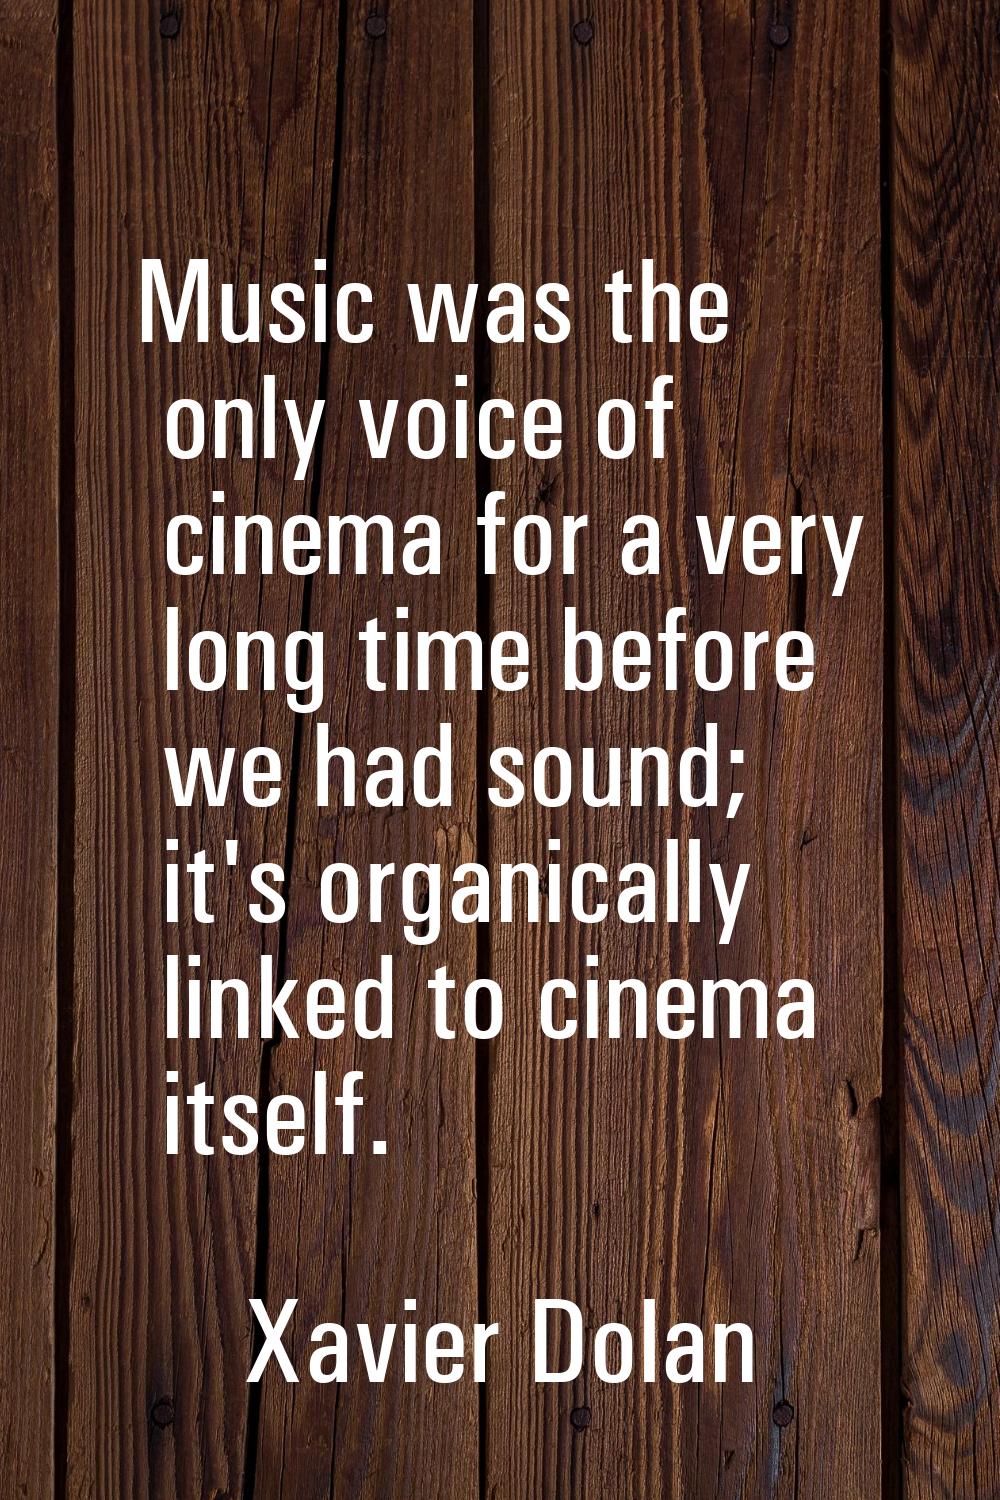 Music was the only voice of cinema for a very long time before we had sound; it's organically linke